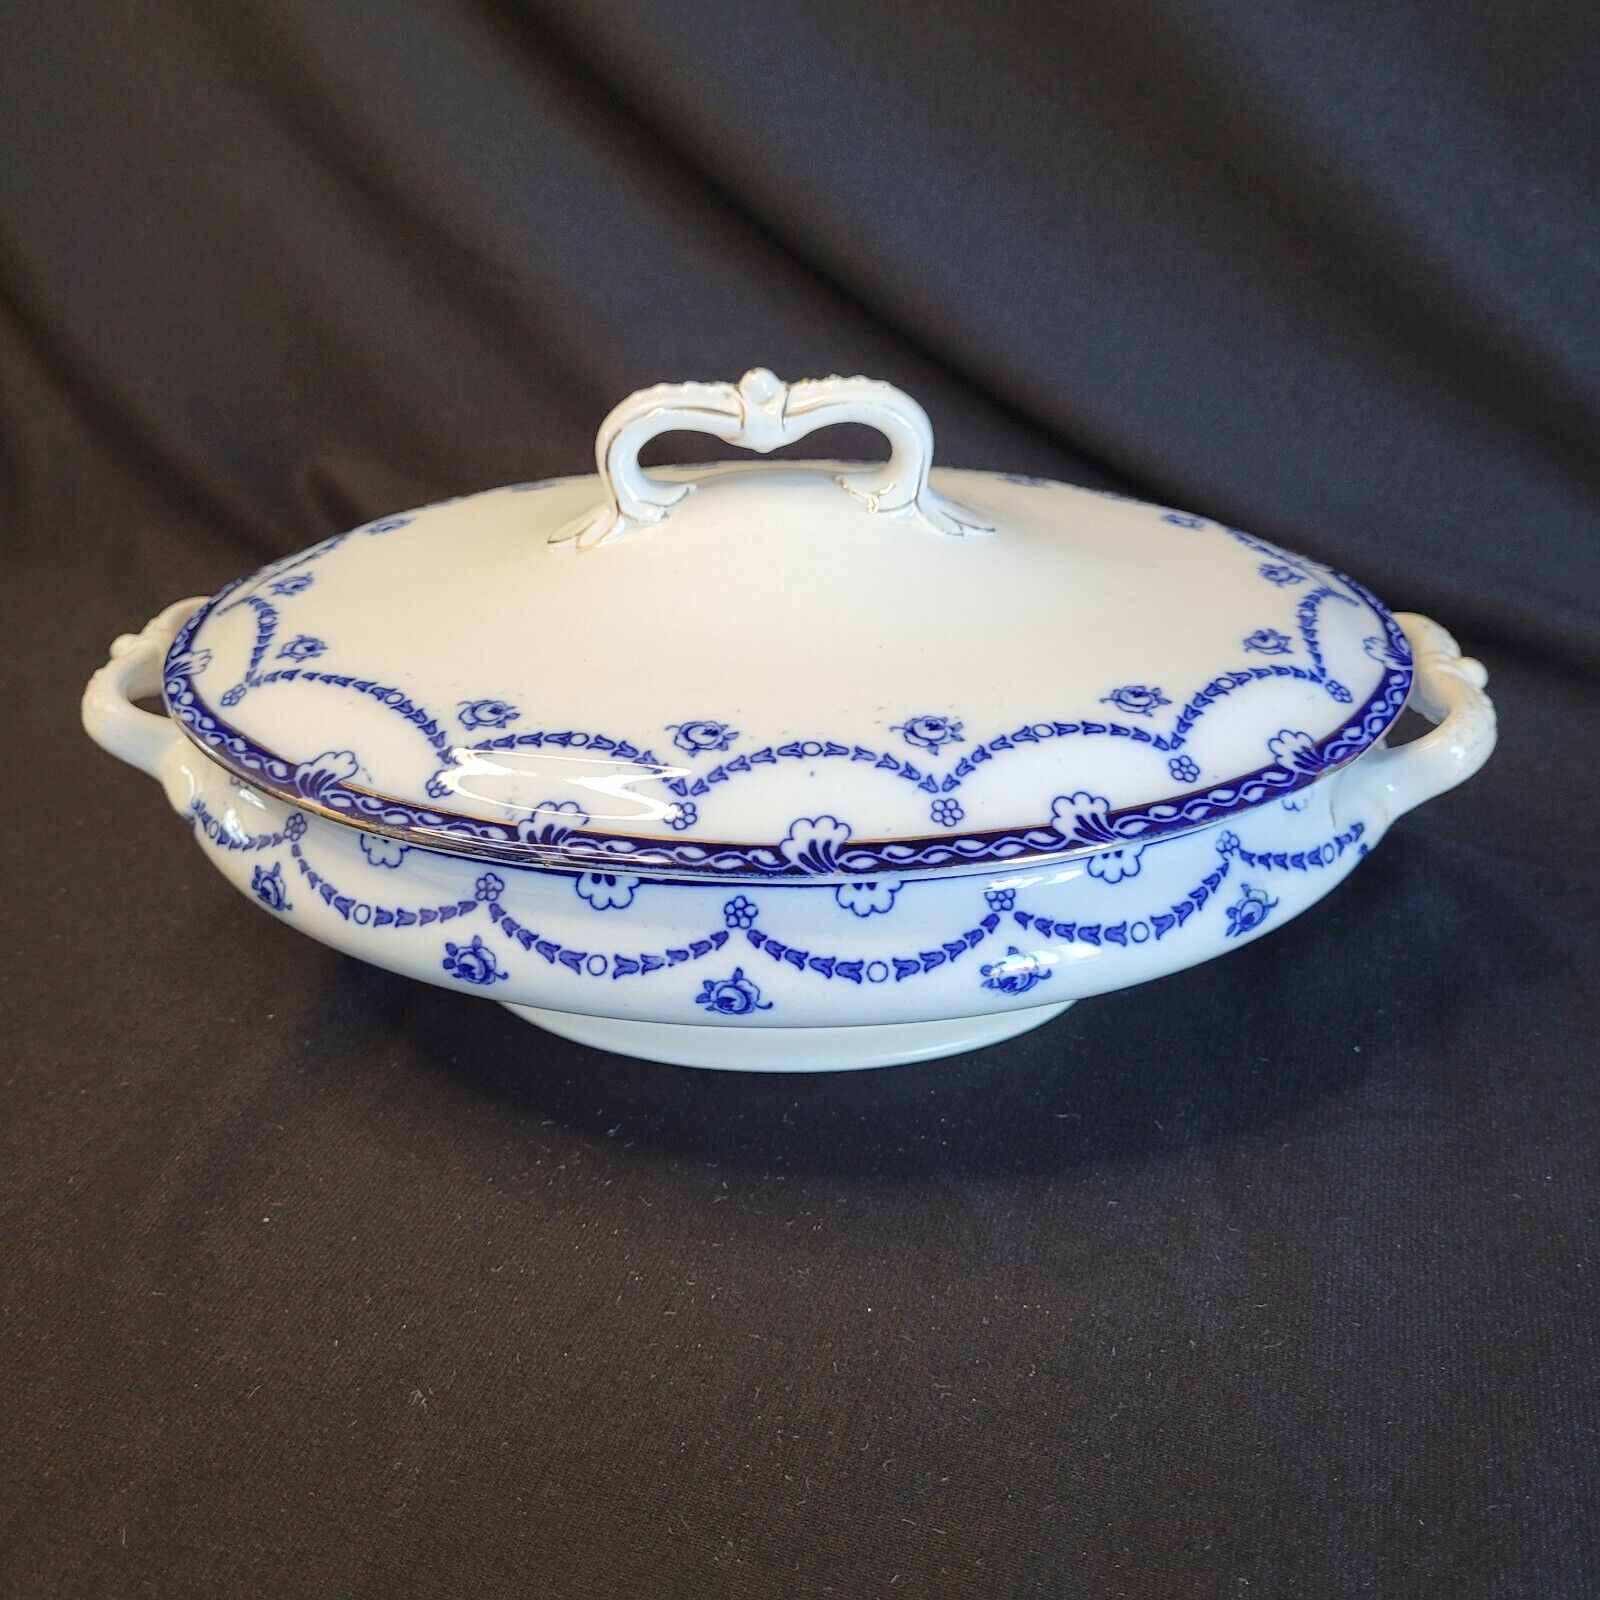 Antique F. Winkle & Co England c1900's Blue Covered Handled Serving Tureen Dish